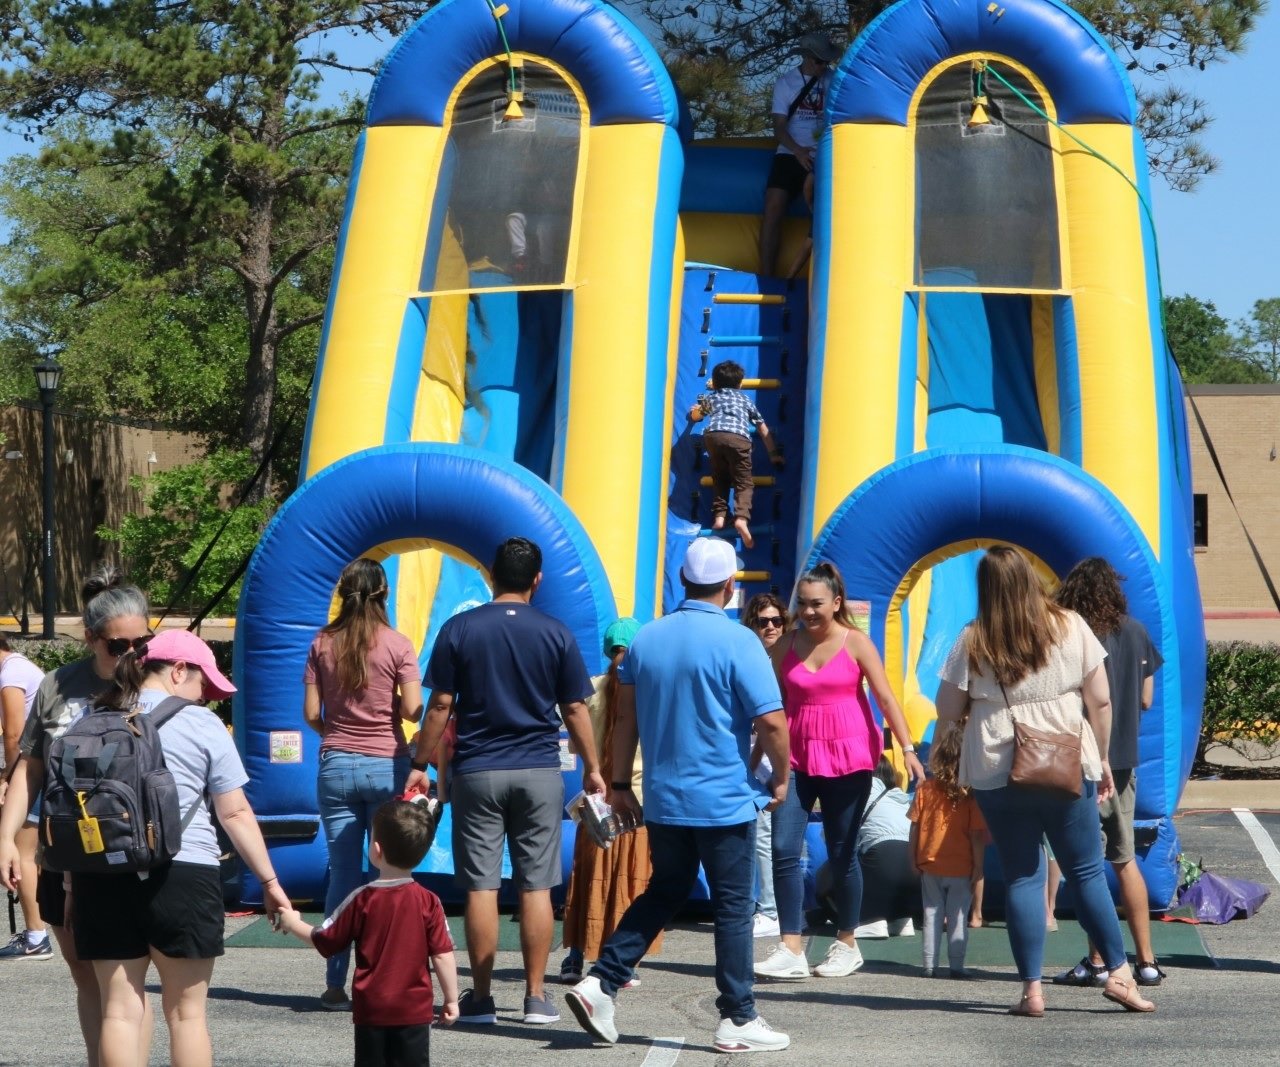 Kingsland Baptist Church held its annual international festival Saturday March 25 at the church, 20555 Kingsland Blvd. The festival had plenty of kid-friendly attractions such as this slide.